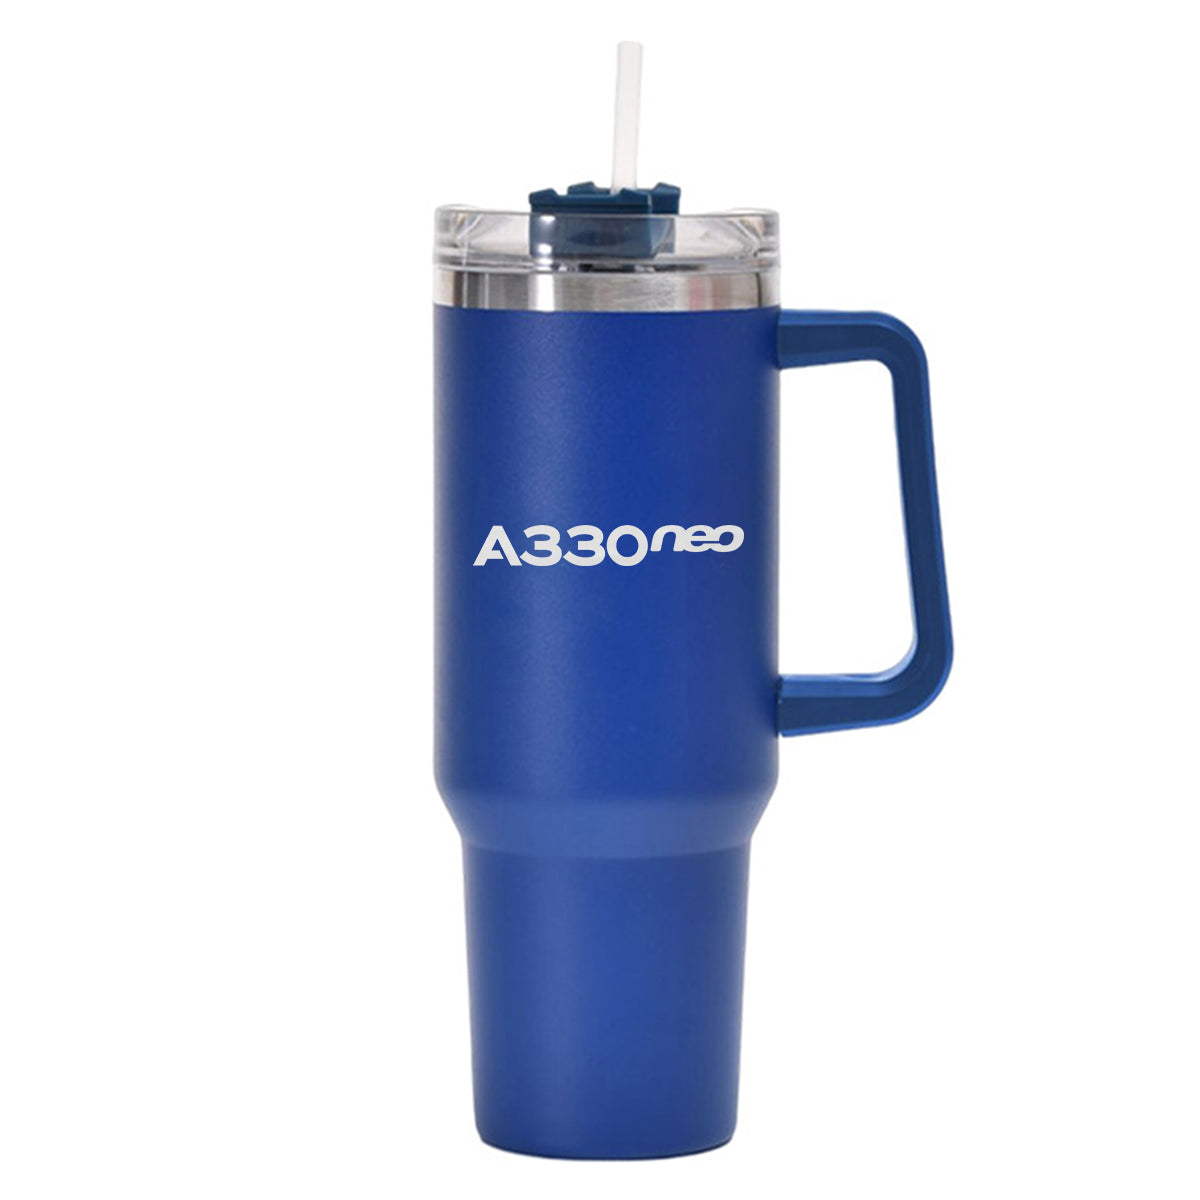 A330neo & Text Designed 40oz Stainless Steel Car Mug With Holder